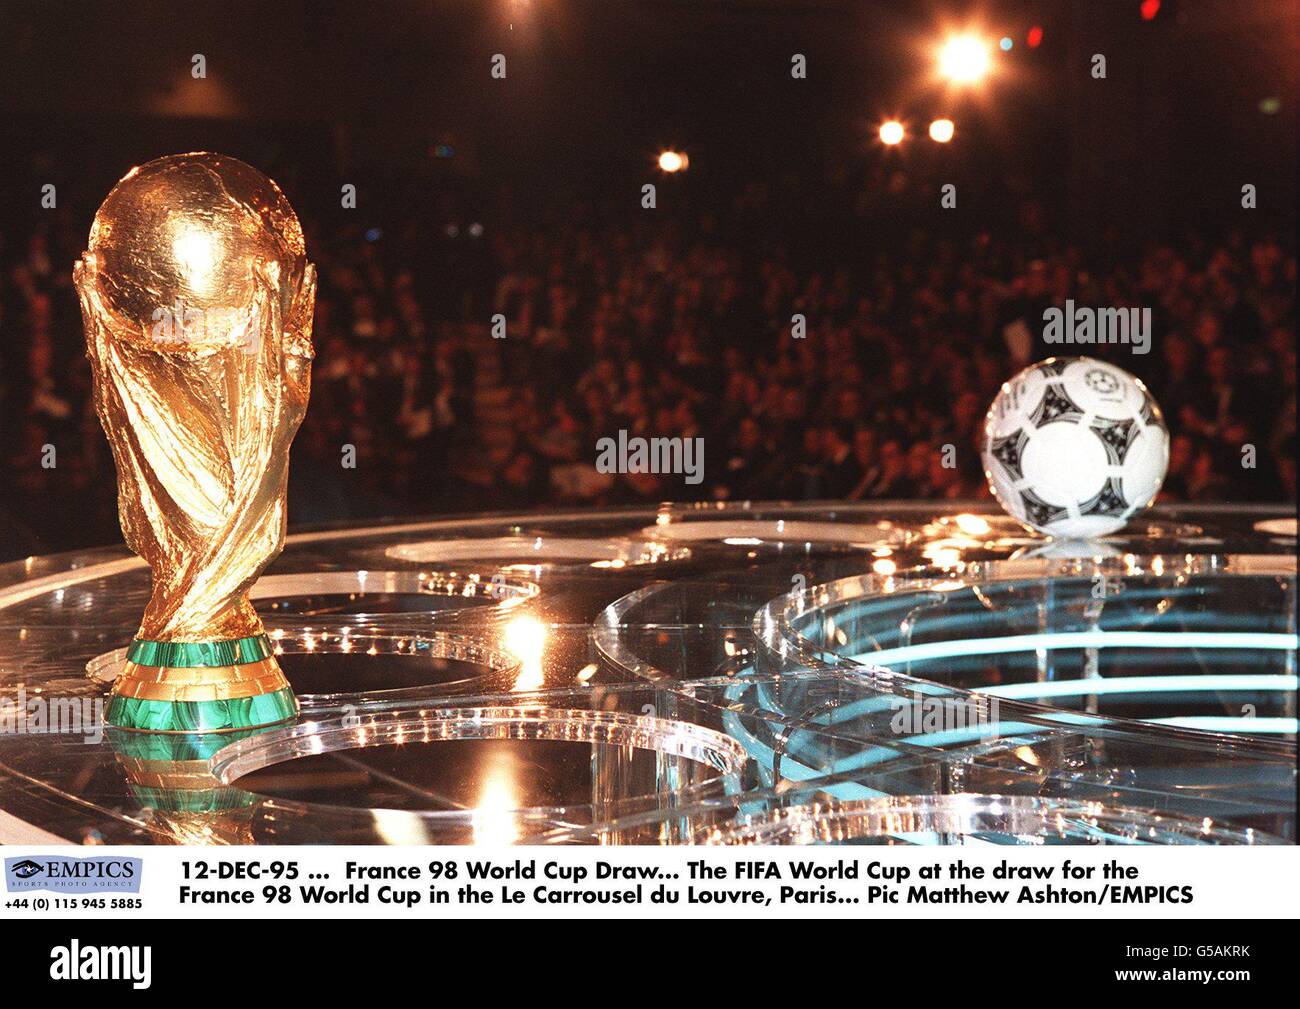 FIFA shakes up World Cup draw method | beIN SPORTS